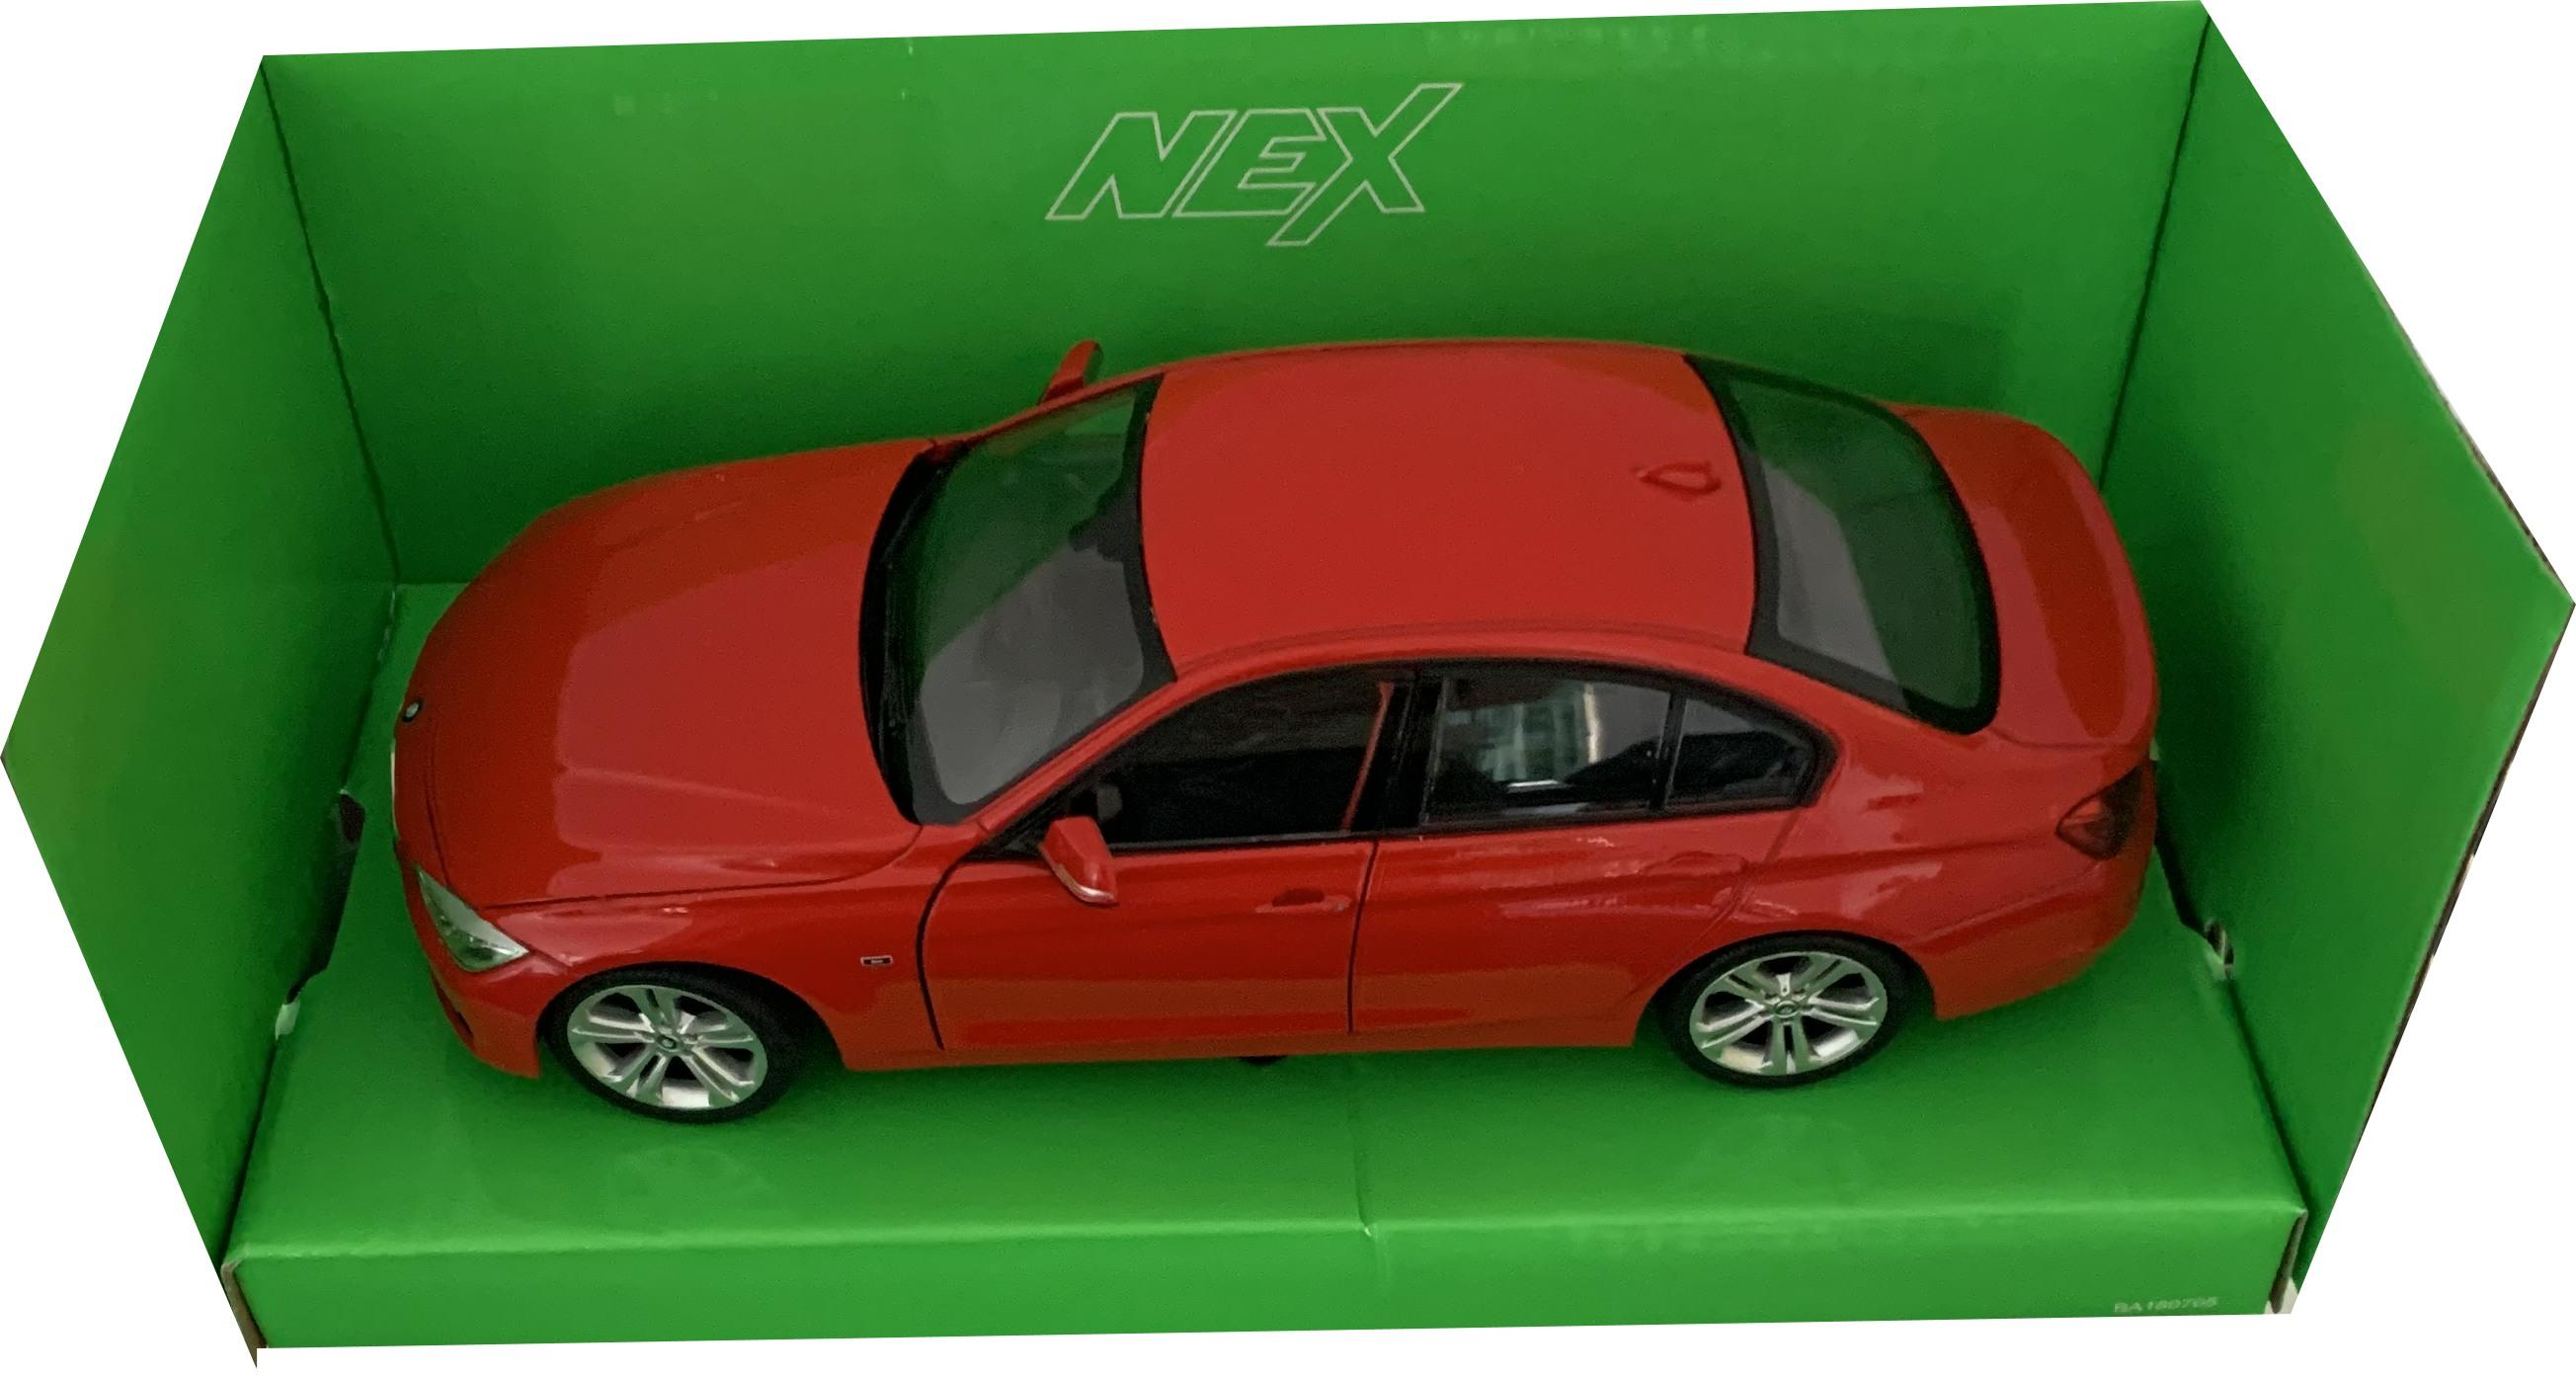 The model is  presented in a window display box, the car is approx. 19 cm long and the presentation box is 23 cm long